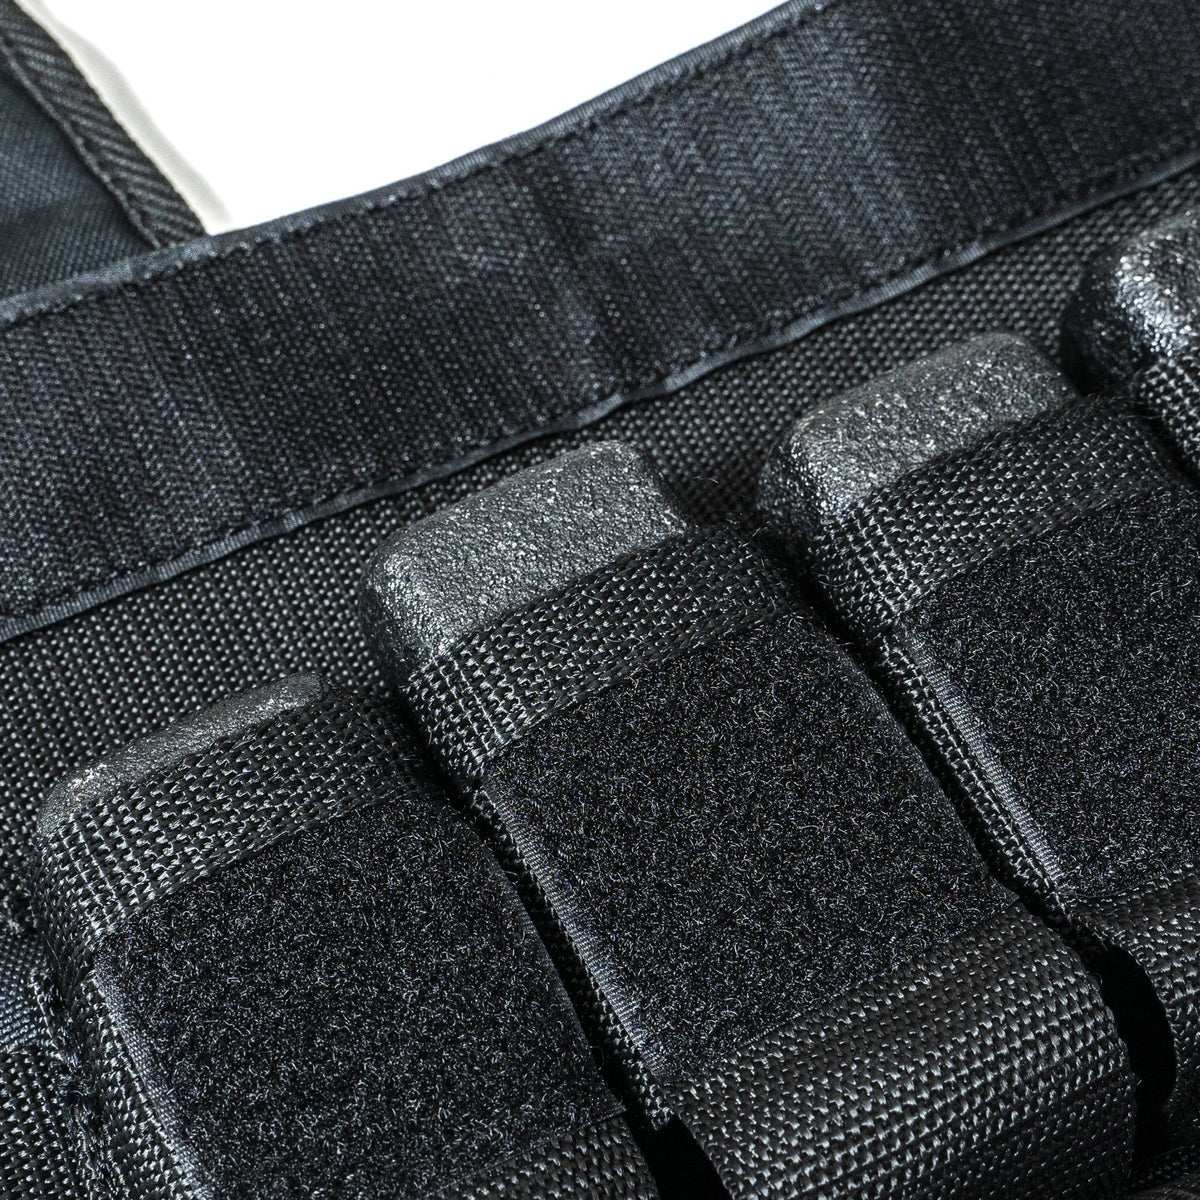 FitWay Equip. 20kg Weighted Vest - Fitness Experience